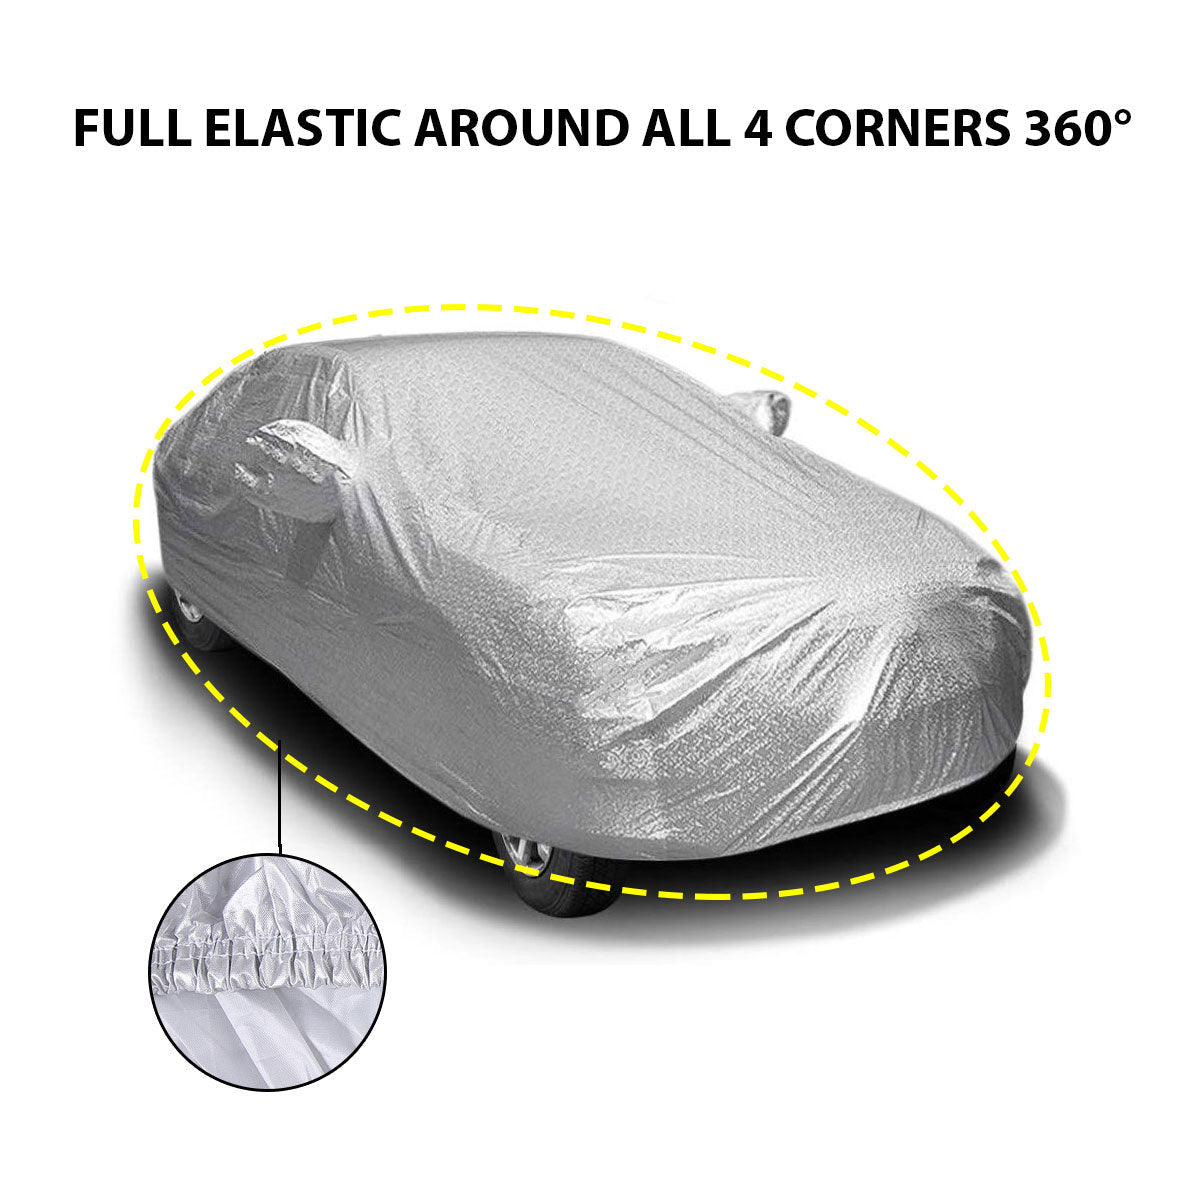 Oshotto Spyro Silver Anti Reflective, dustproof and Water Proof Car Body Cover with Mirror Pockets For Mercedes Benz GLE